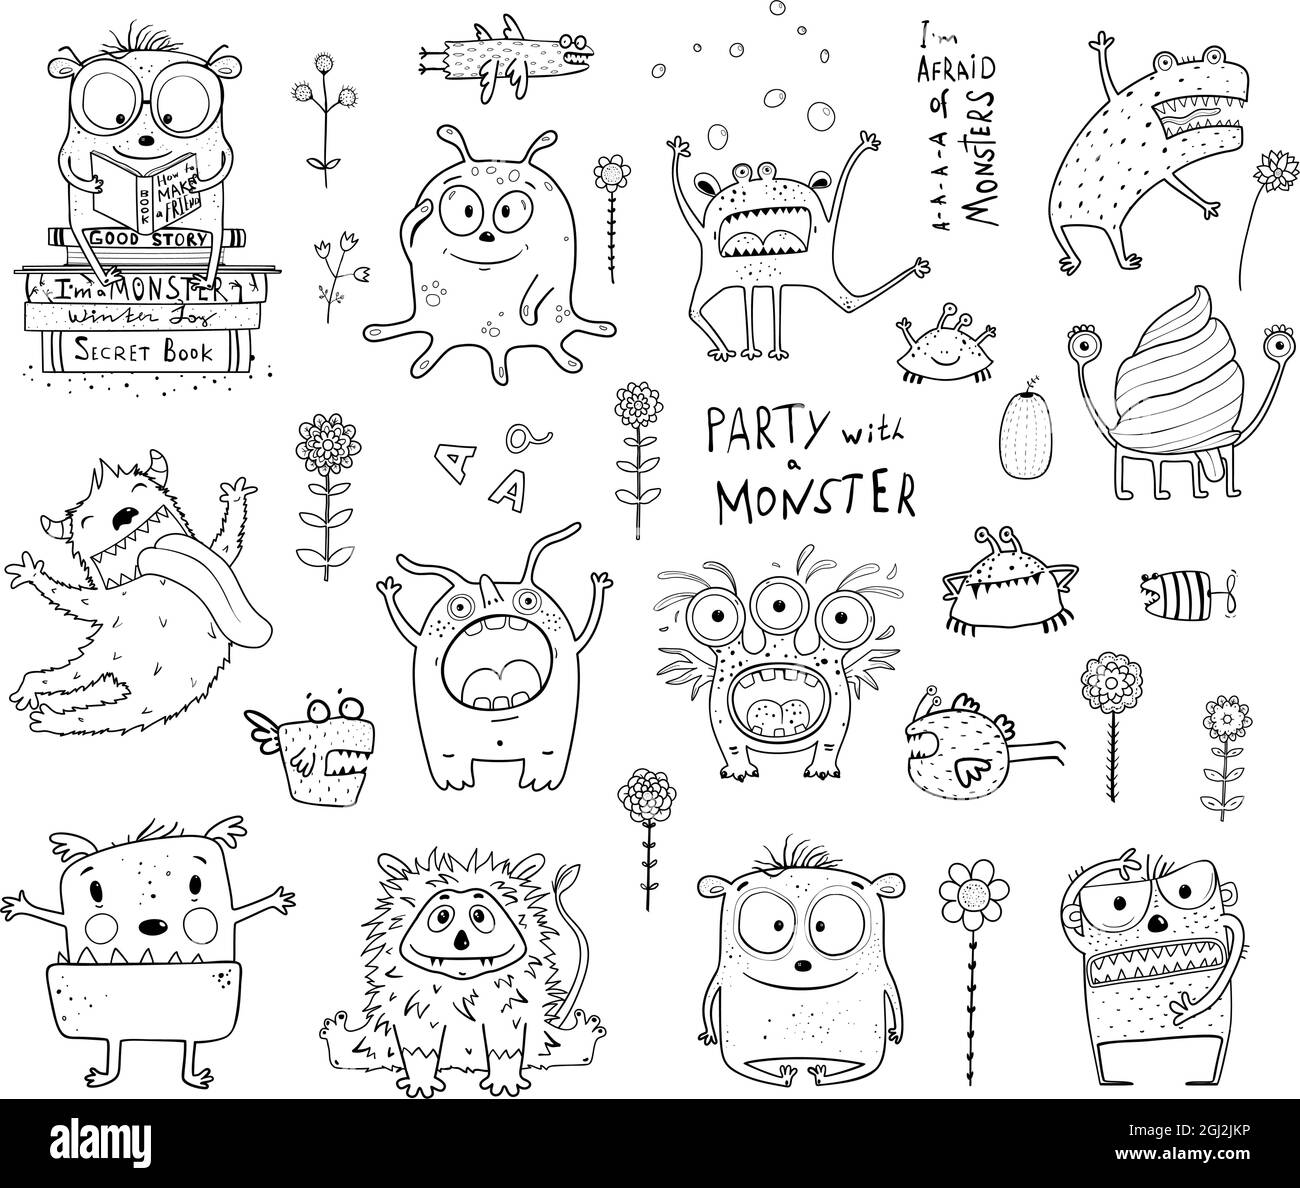 Monsters for Kids Coloring Book Collection Stock Vector